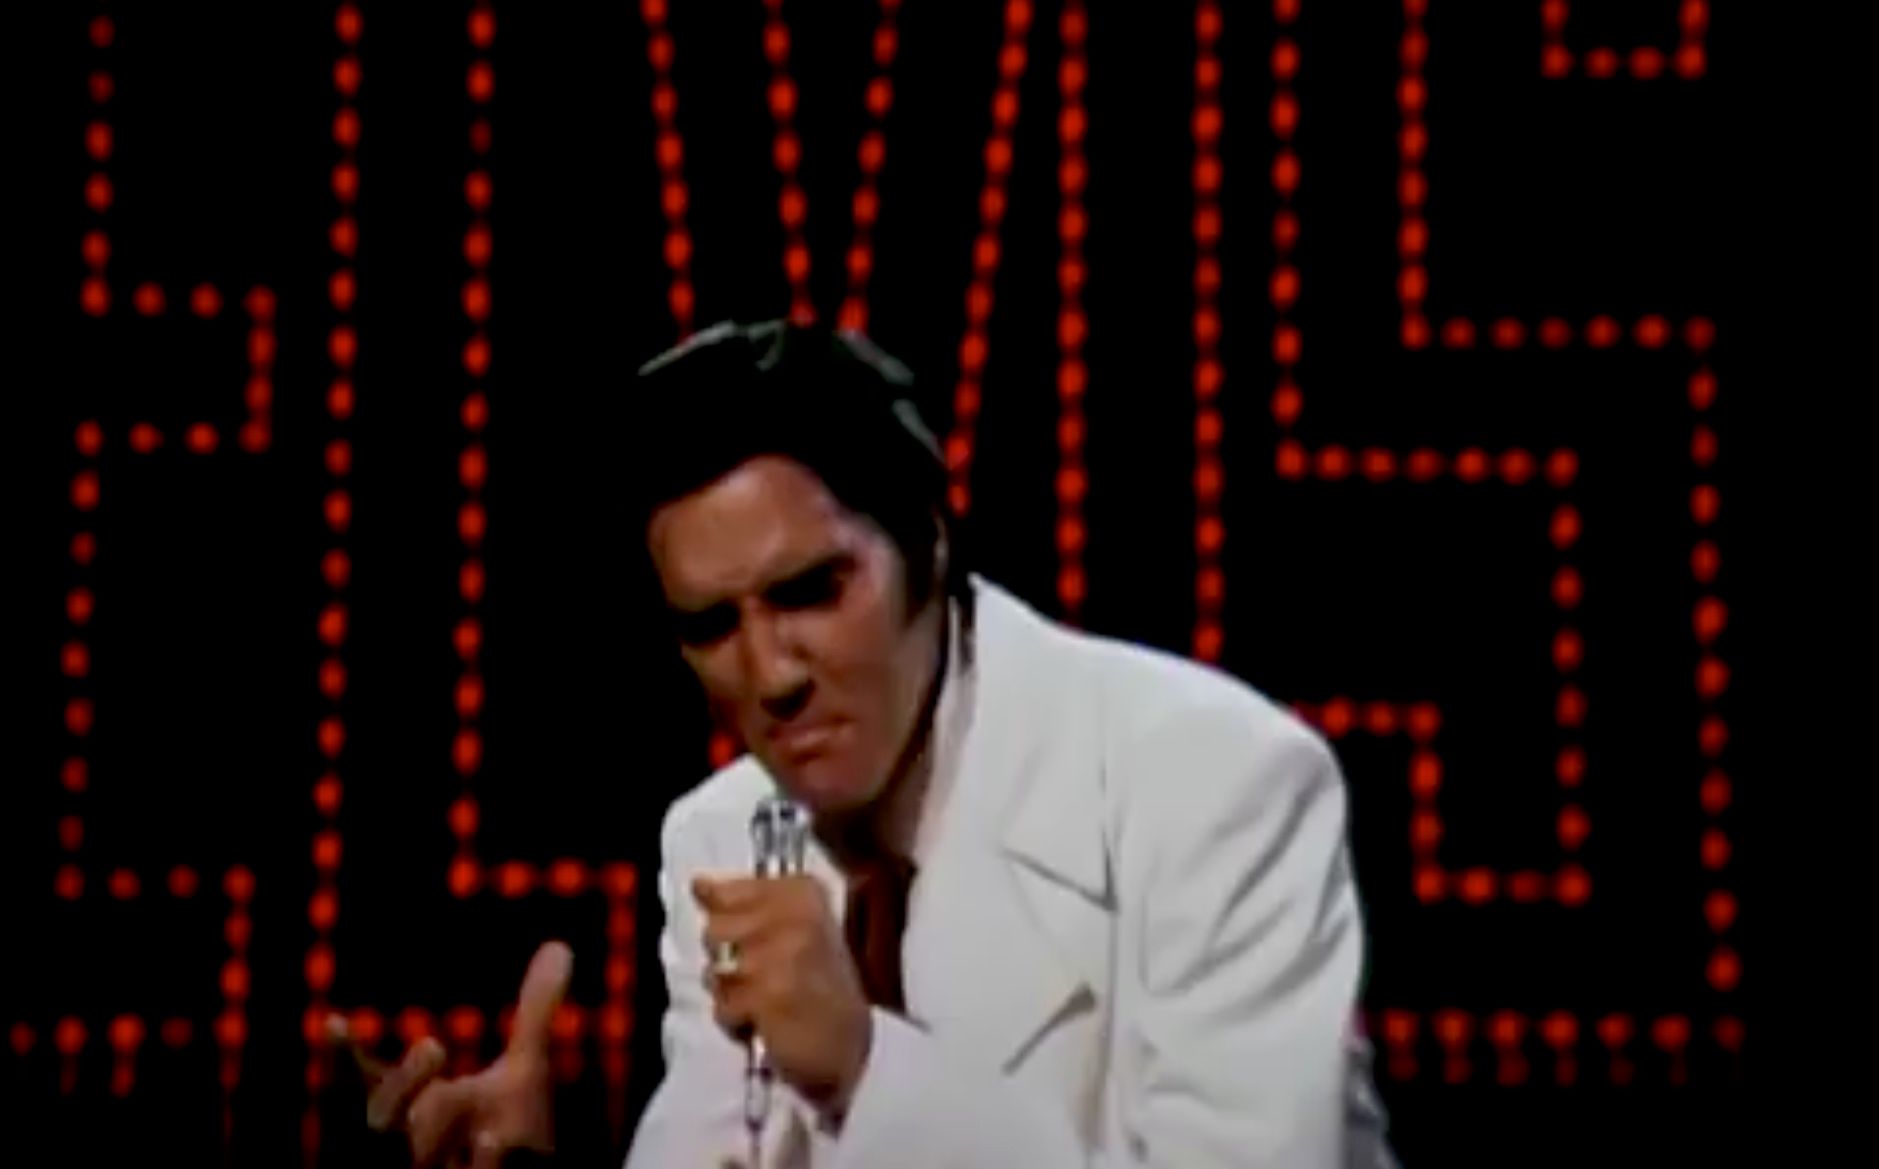 Elvis Presley - If I Can Dream ('68 Comeback Special) 